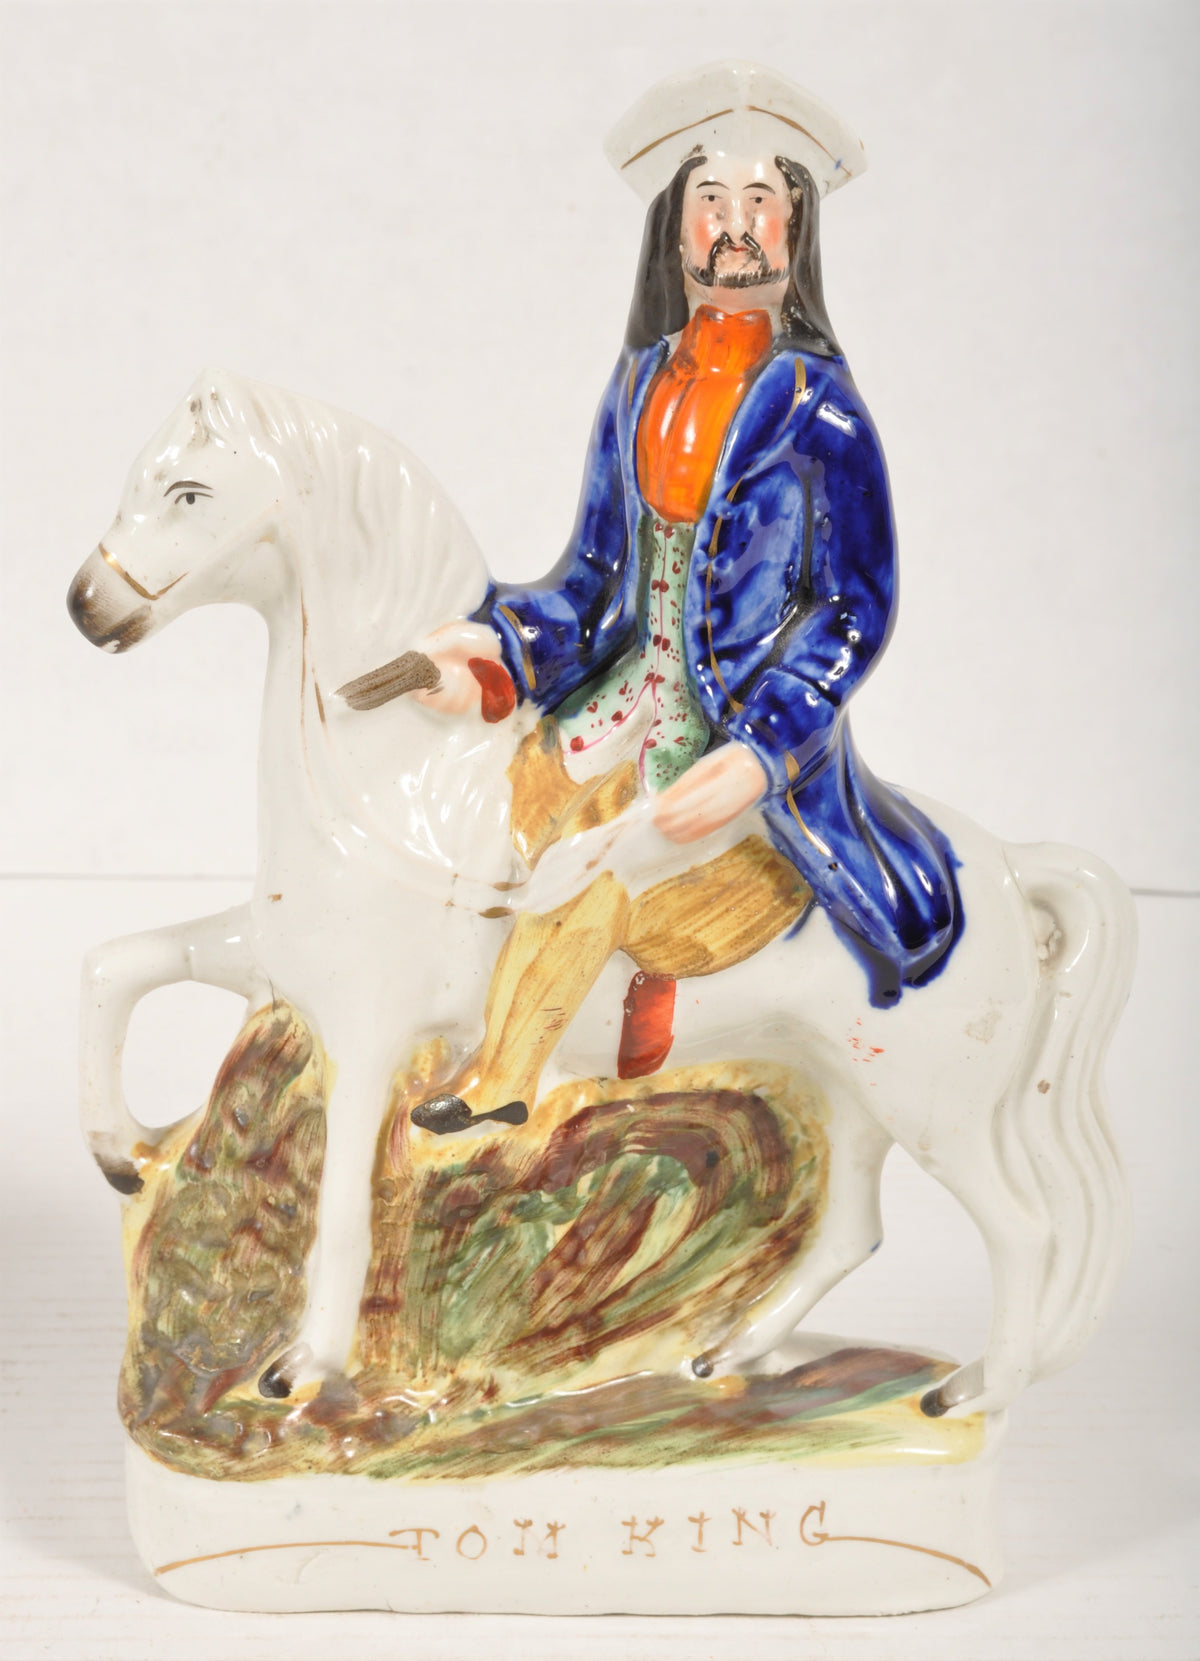 Pair of Antique Staffordshire Flat-Back Figurines Modeled as Highwaymen, Circa 1860